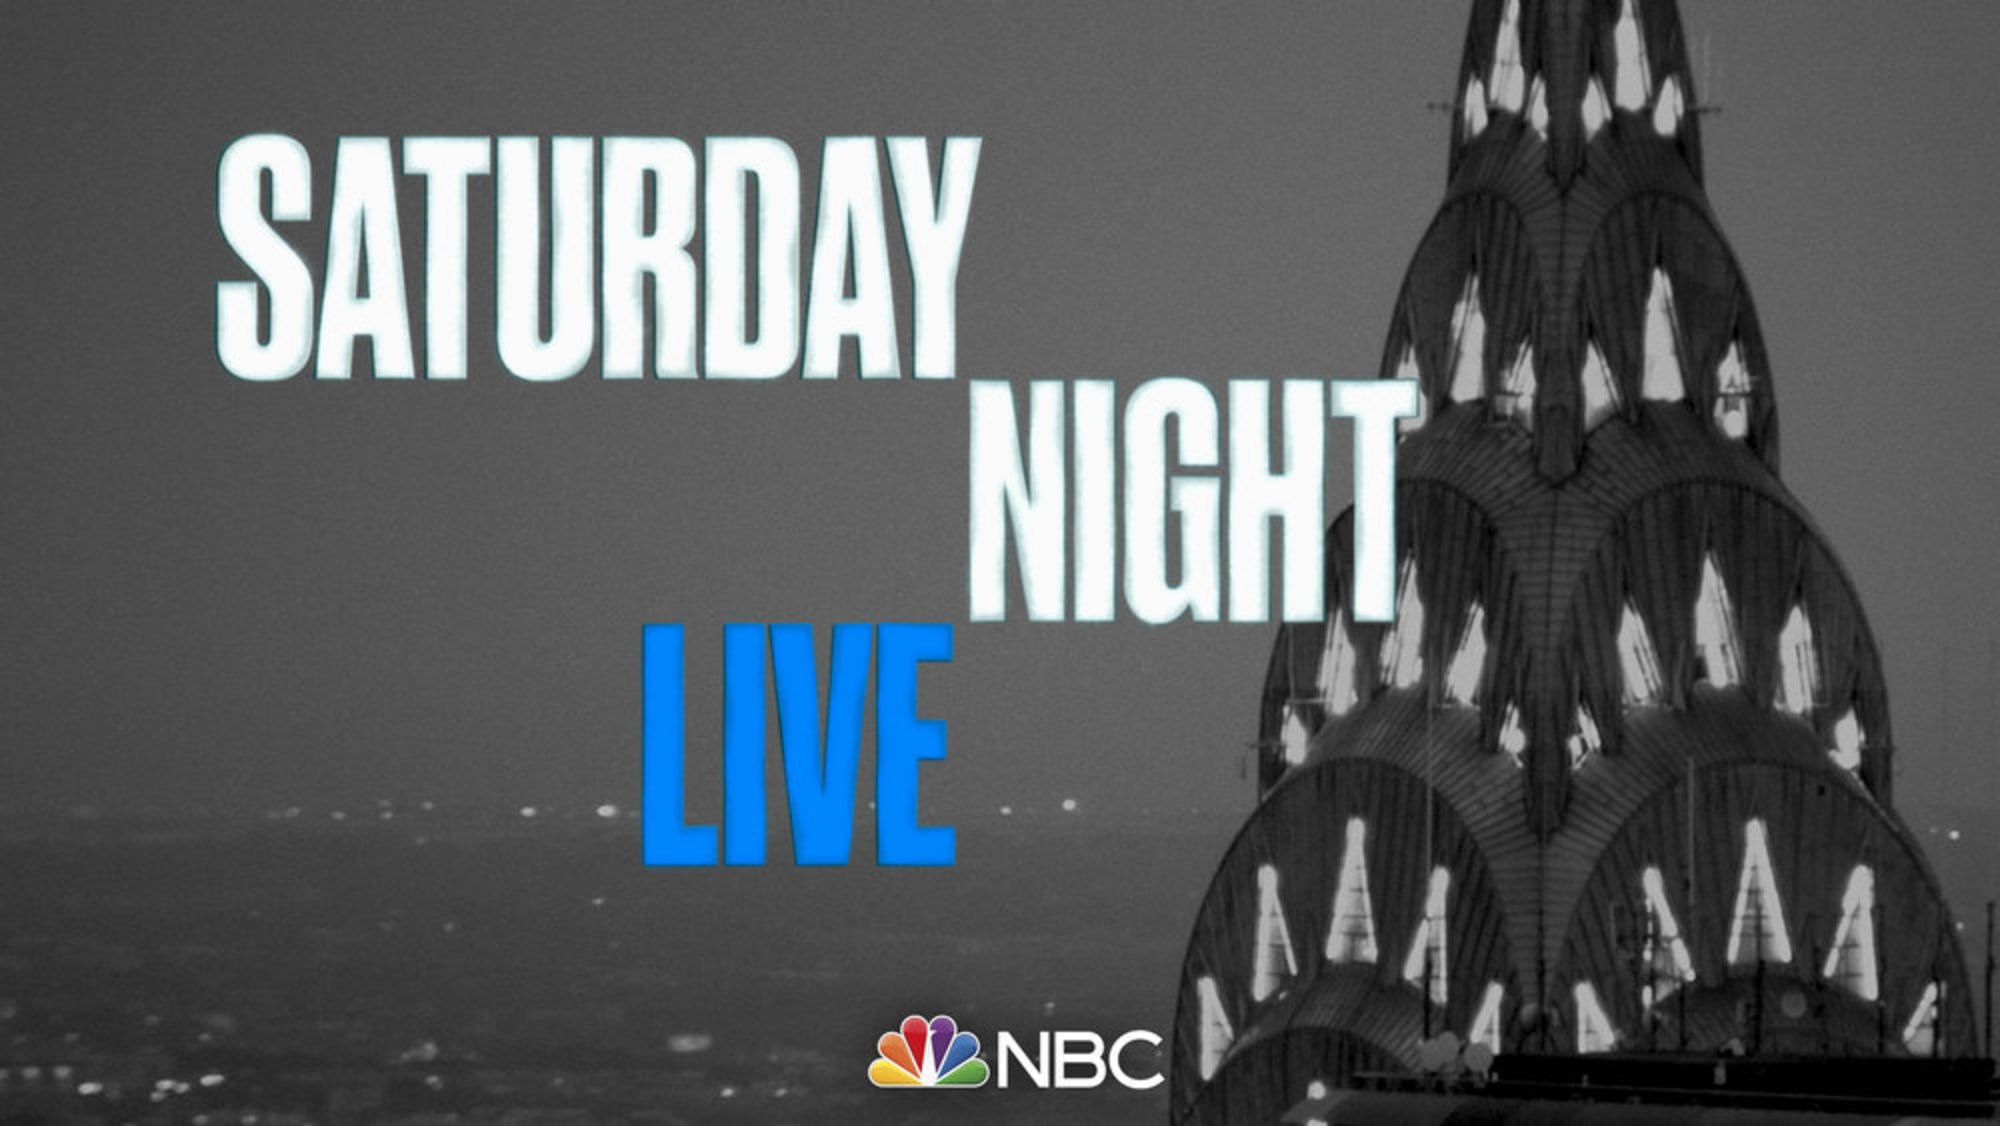 Is Saturday Night Live new tonight? (Is SNL new on Sept. 17, 2022)